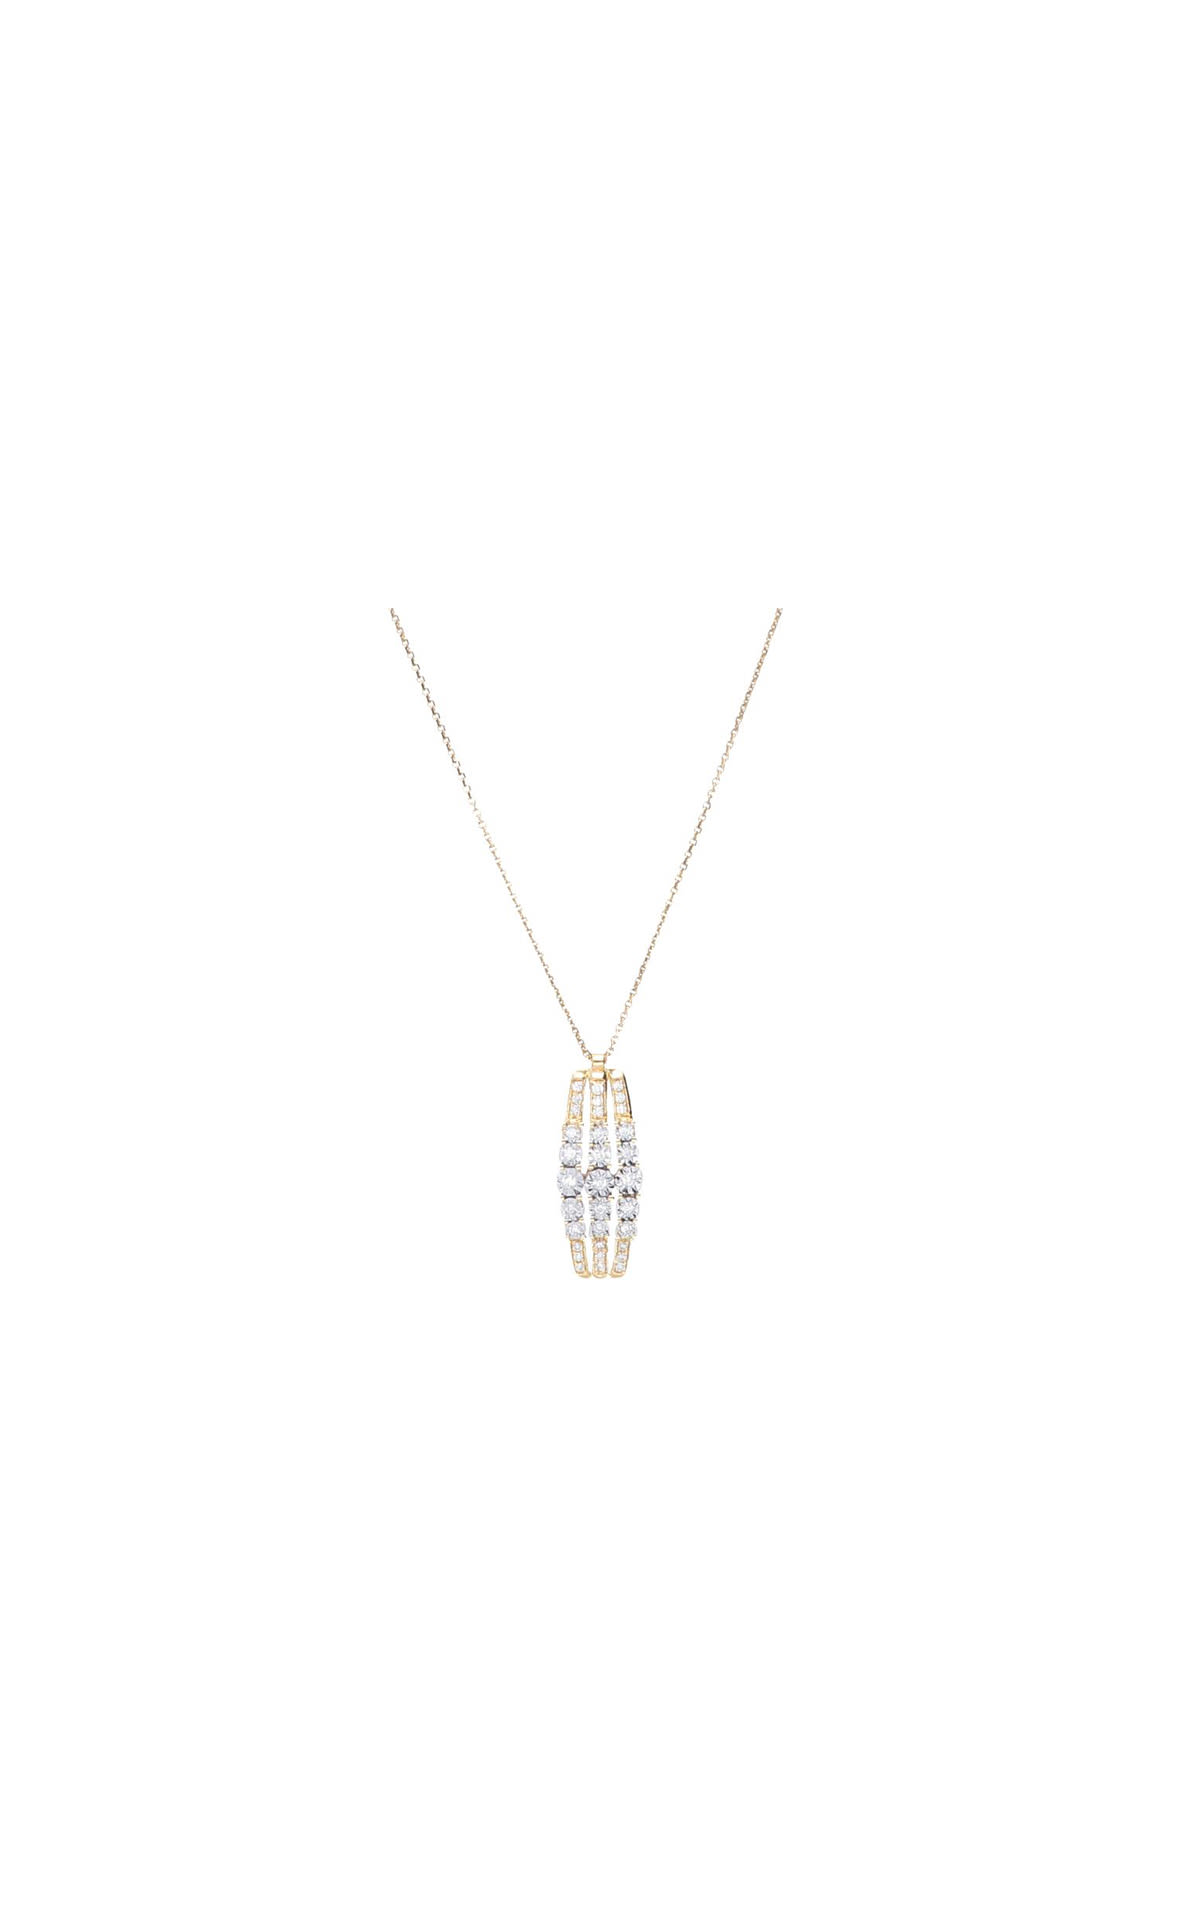 Luxury Zone necklace in yellow gold with diamonds